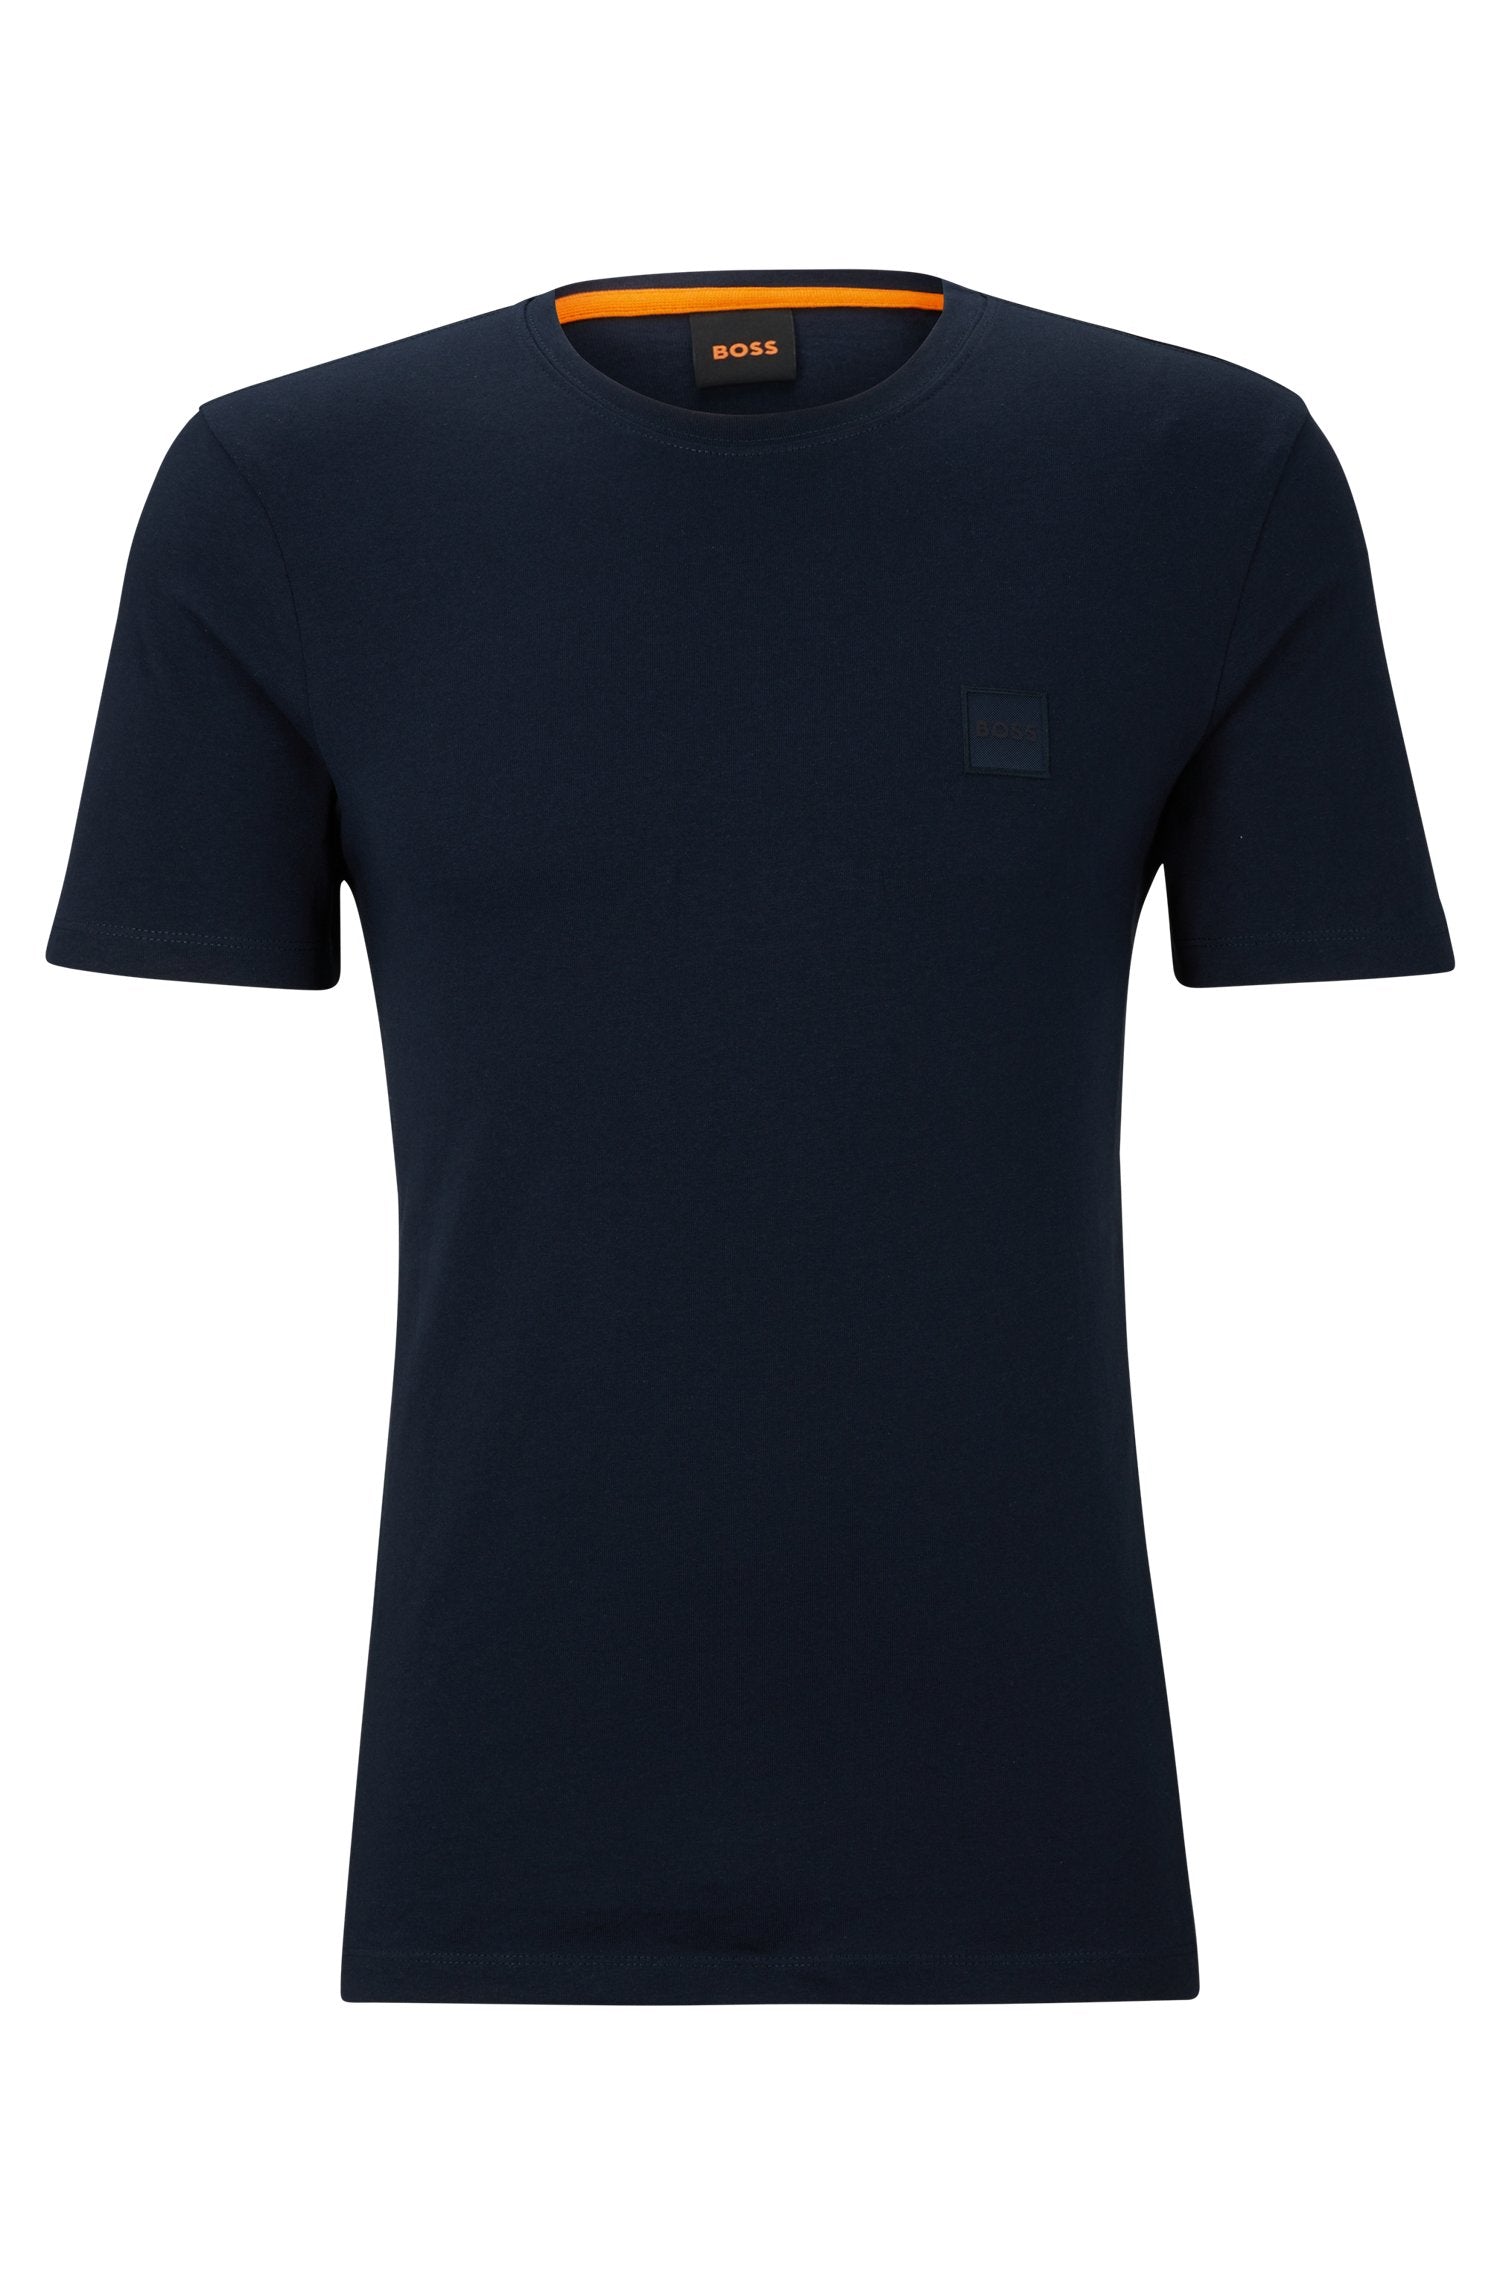 T-Shirt col rond homme BOSS marine | Georgespaul